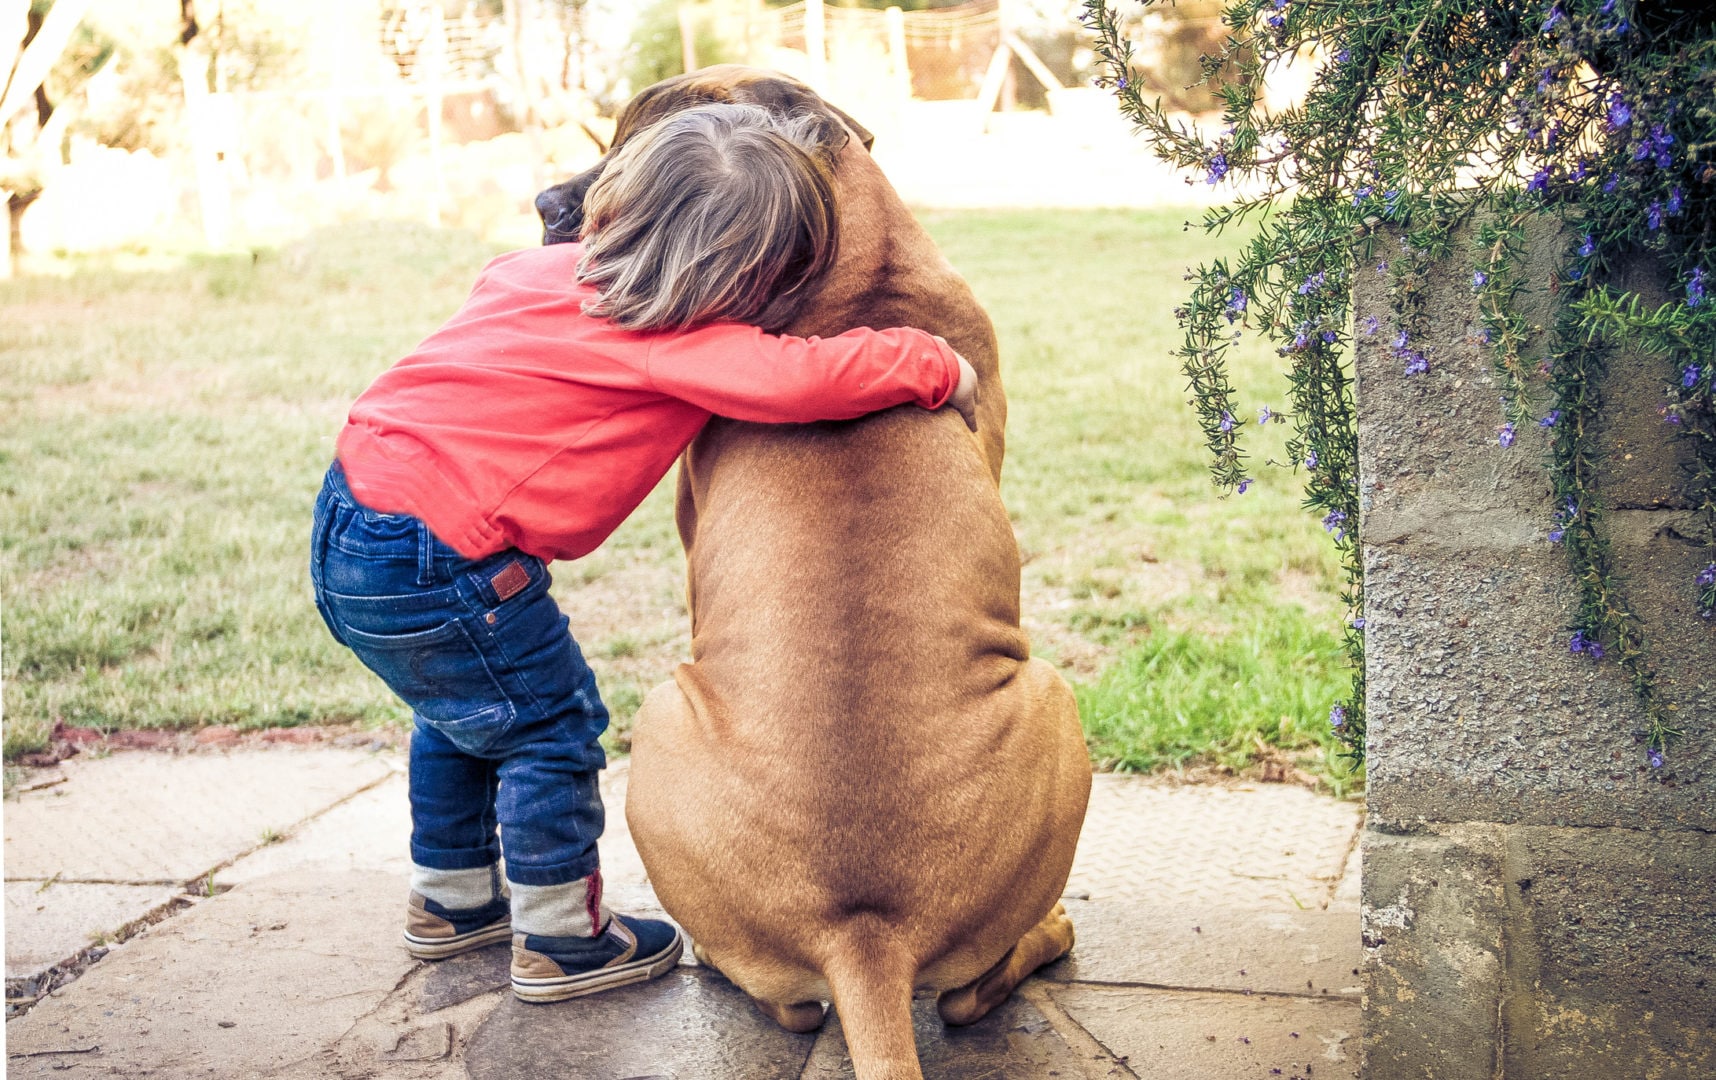 Best family guard dogs: 7 top breeds - Care.com Resources